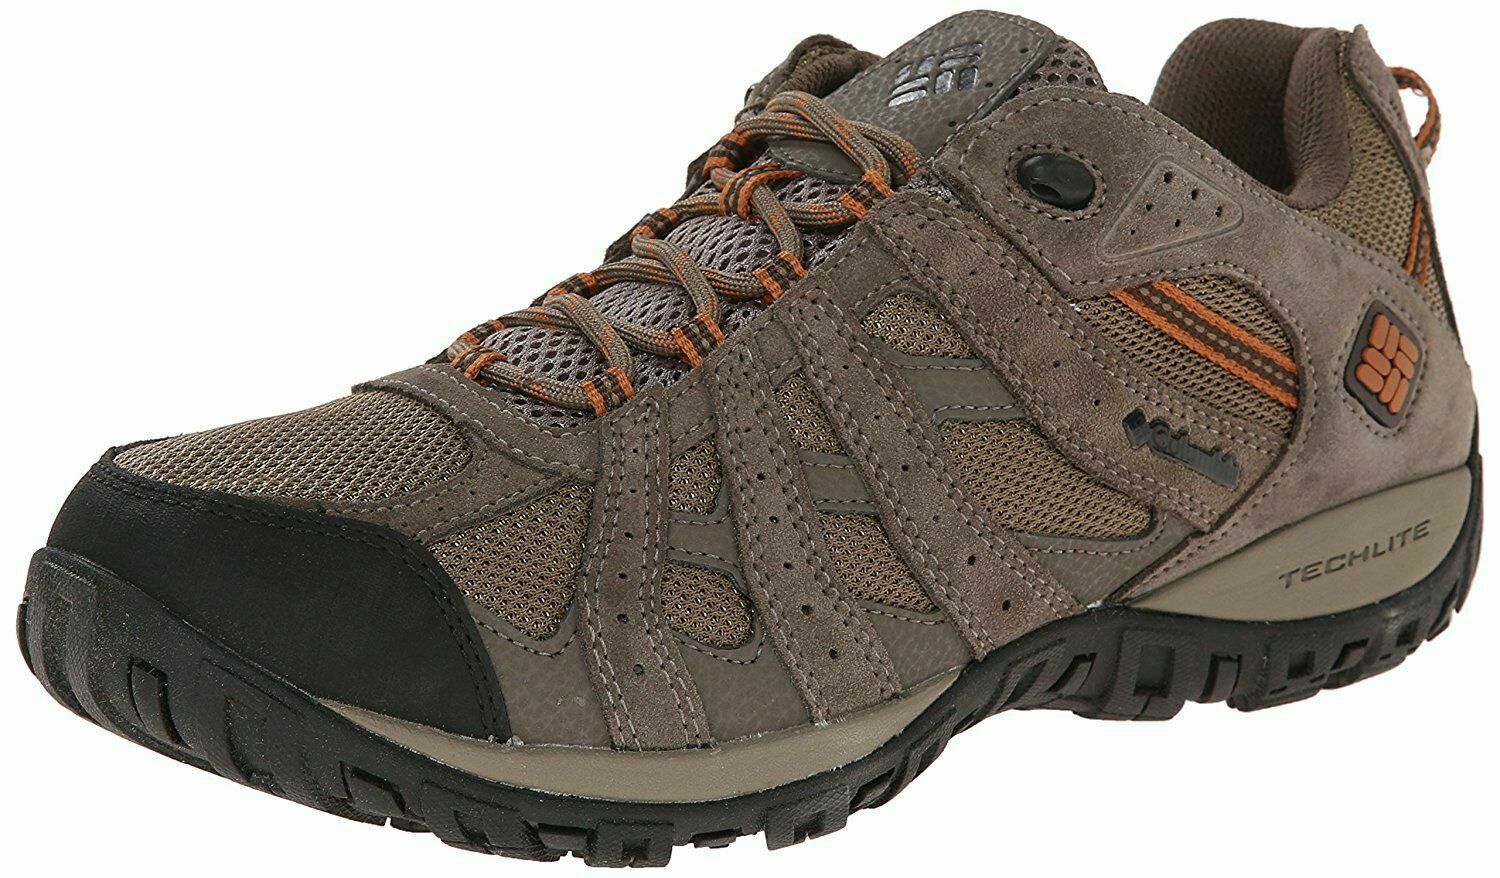 Columbia Redmond waterproof leather hiking shoes Men's 9 Wide New in the box!